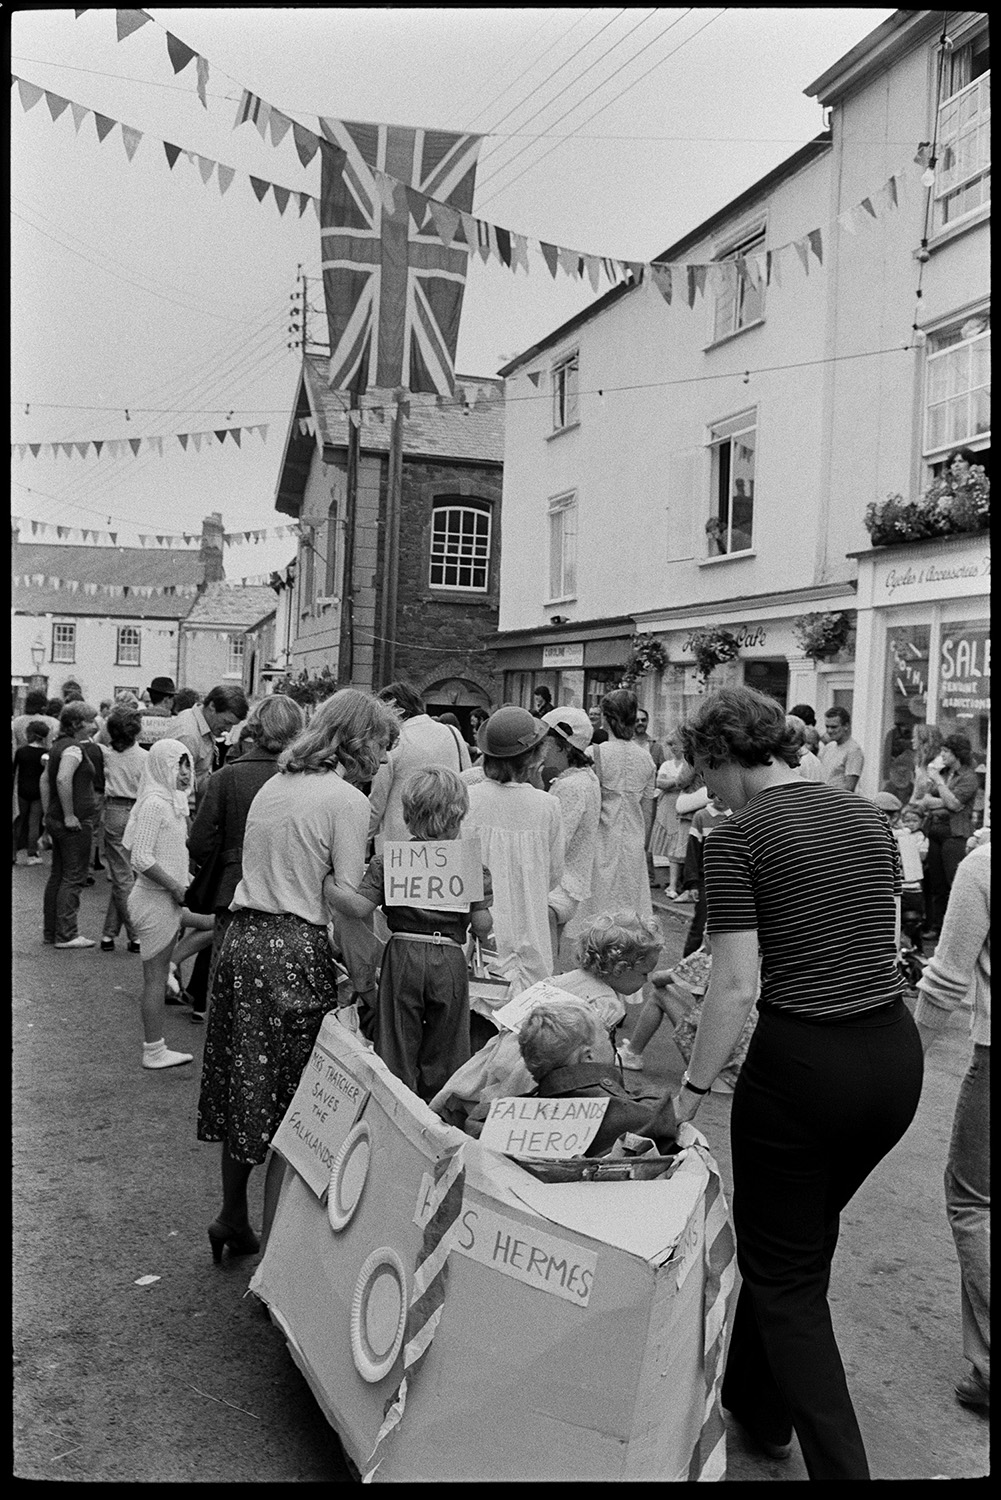 Fancy dress parade with brass band, going home afterwards. 
[Two women pushing a pram made into the shape of the boat HMS Hermes for a fancy dress competition at Chulmleigh Fair. Three children are sat in the 'boat'. Other people in the street are in fancy dress and the street is decorated with bunting and a Union Jack flag.]]